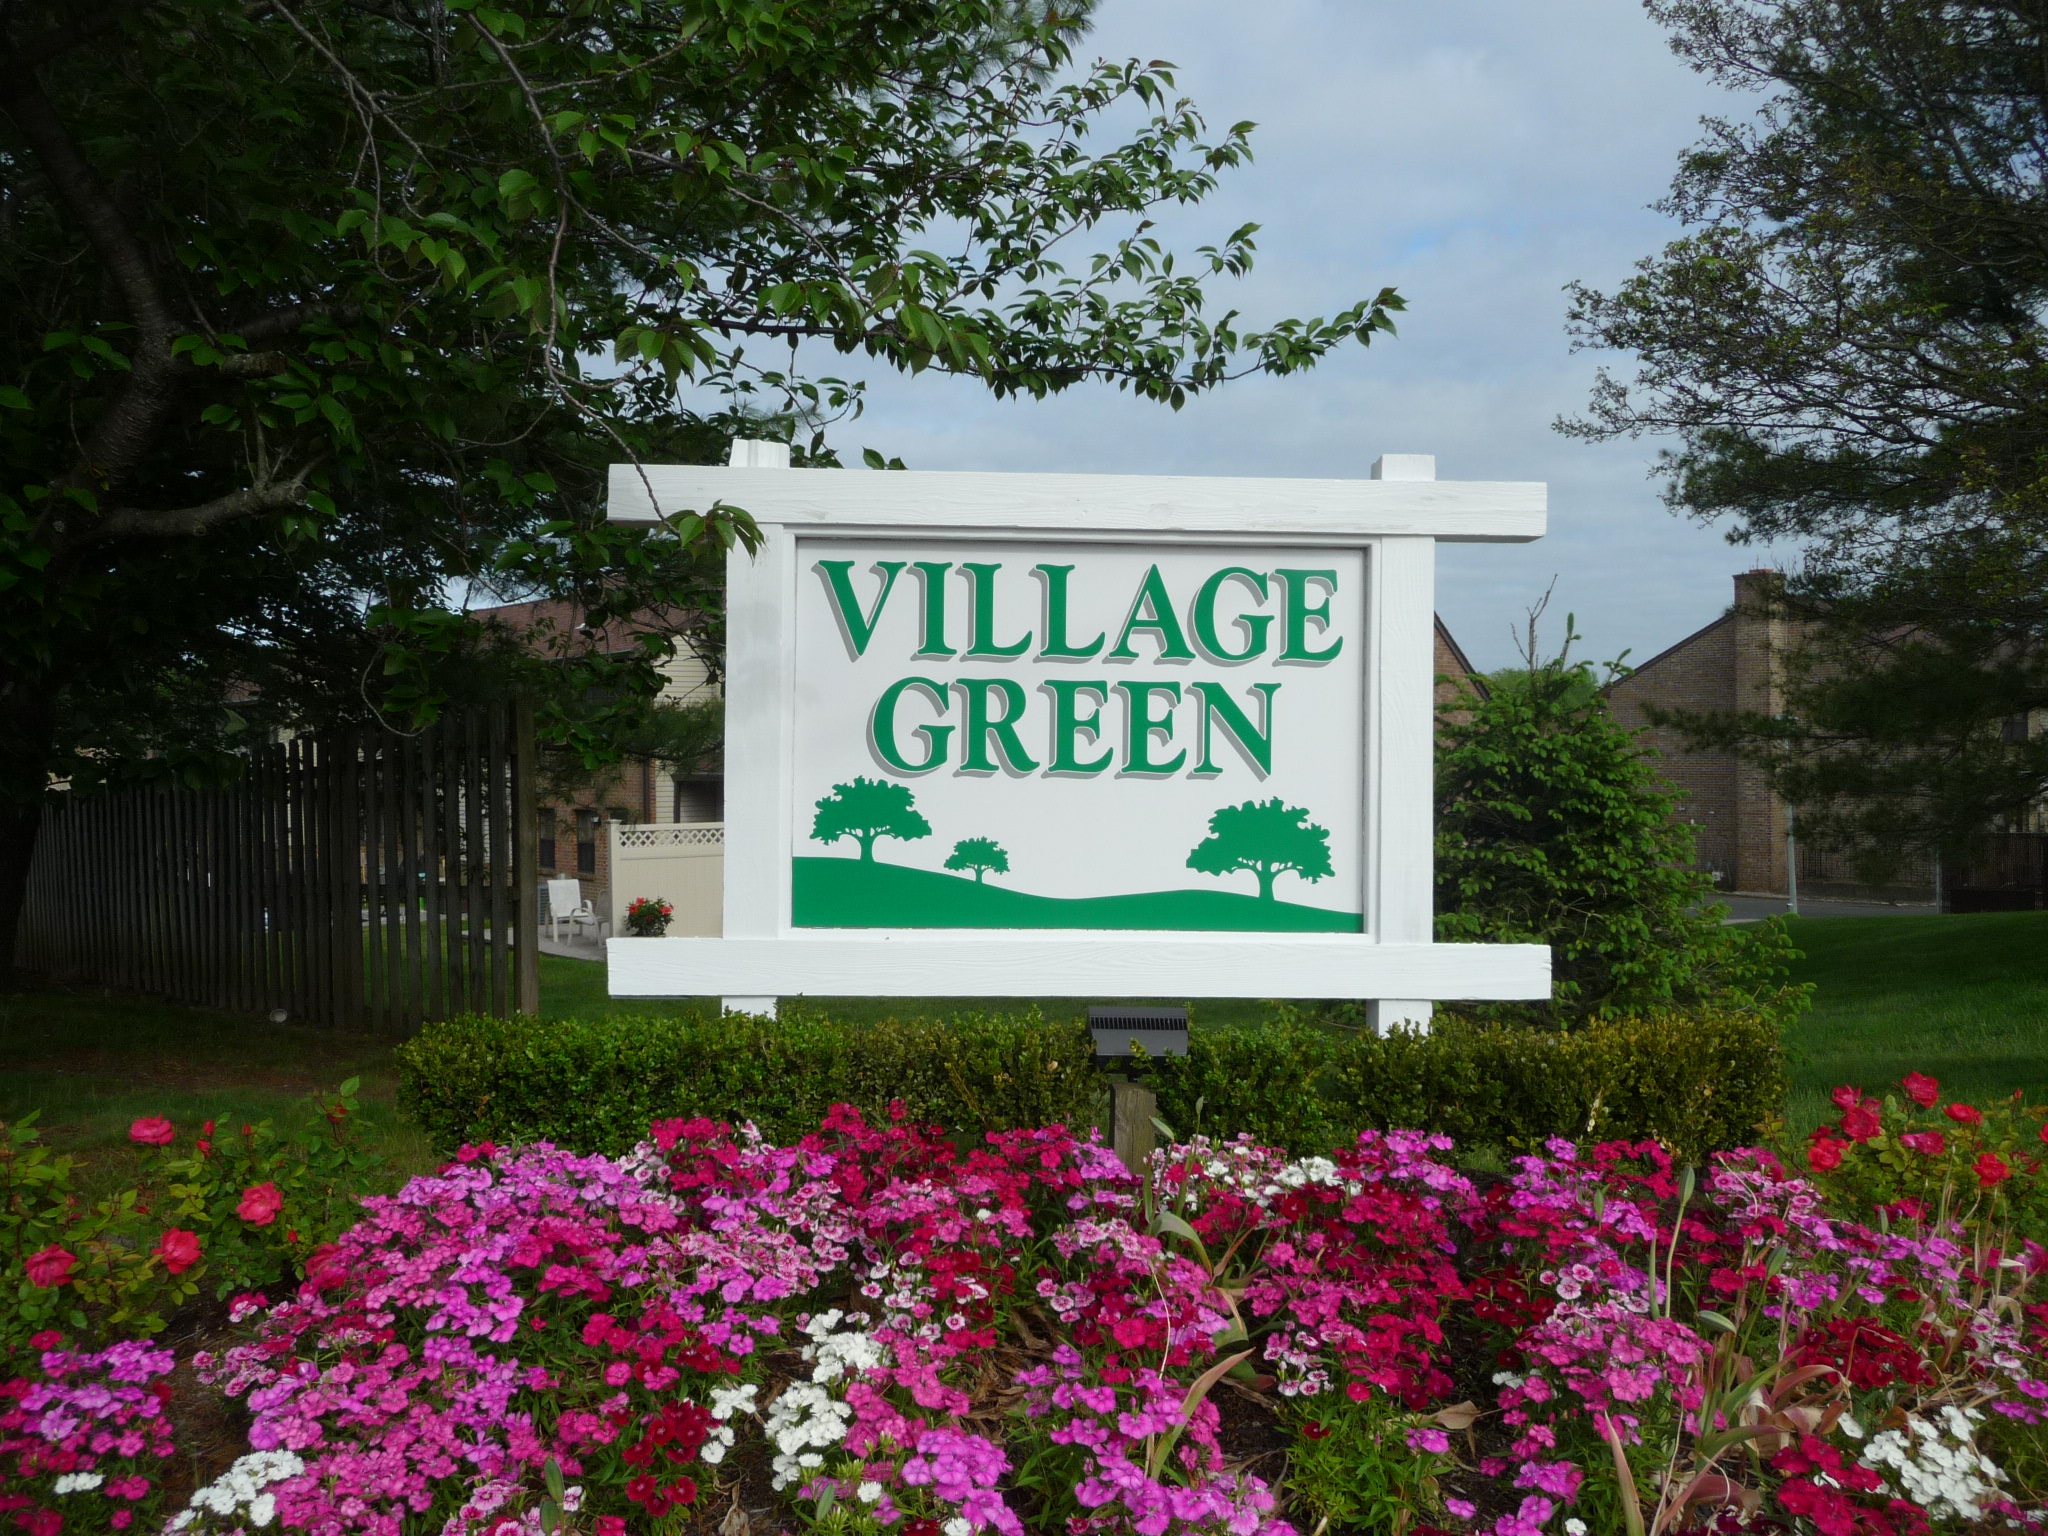 Village Green Condos are located off of Beers Street in Hazlet, NJ.